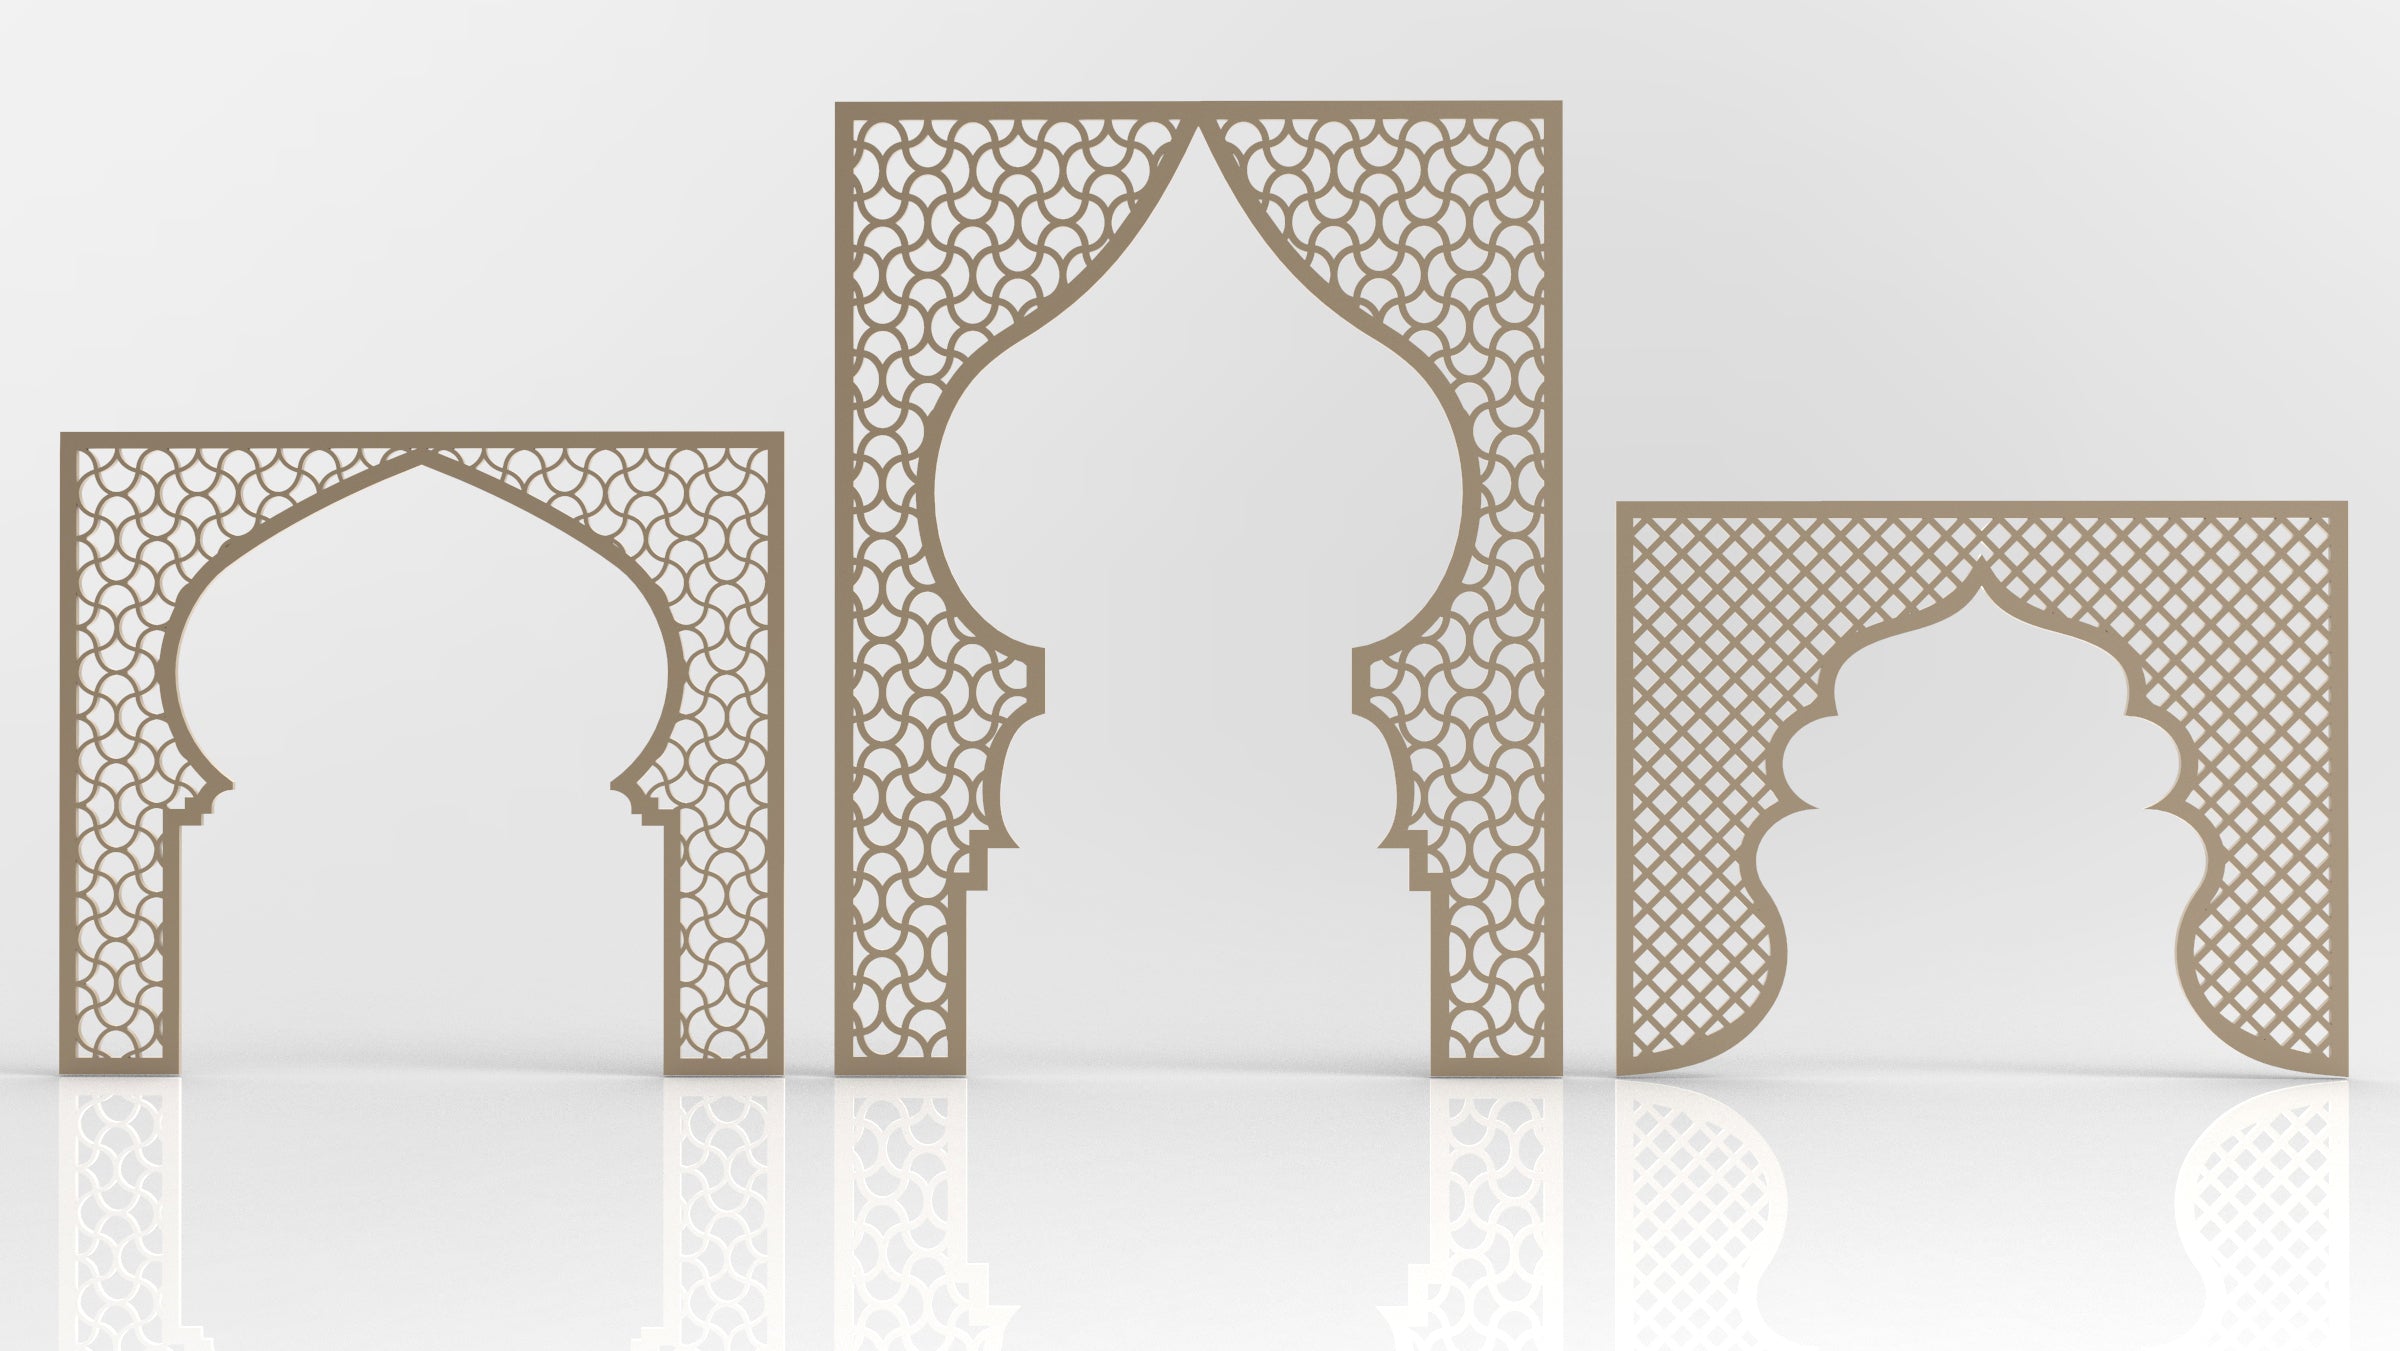 Abstract Pattern Panel Templates CNC Laser Cutting File | SVG, DXF, AI |#C031|